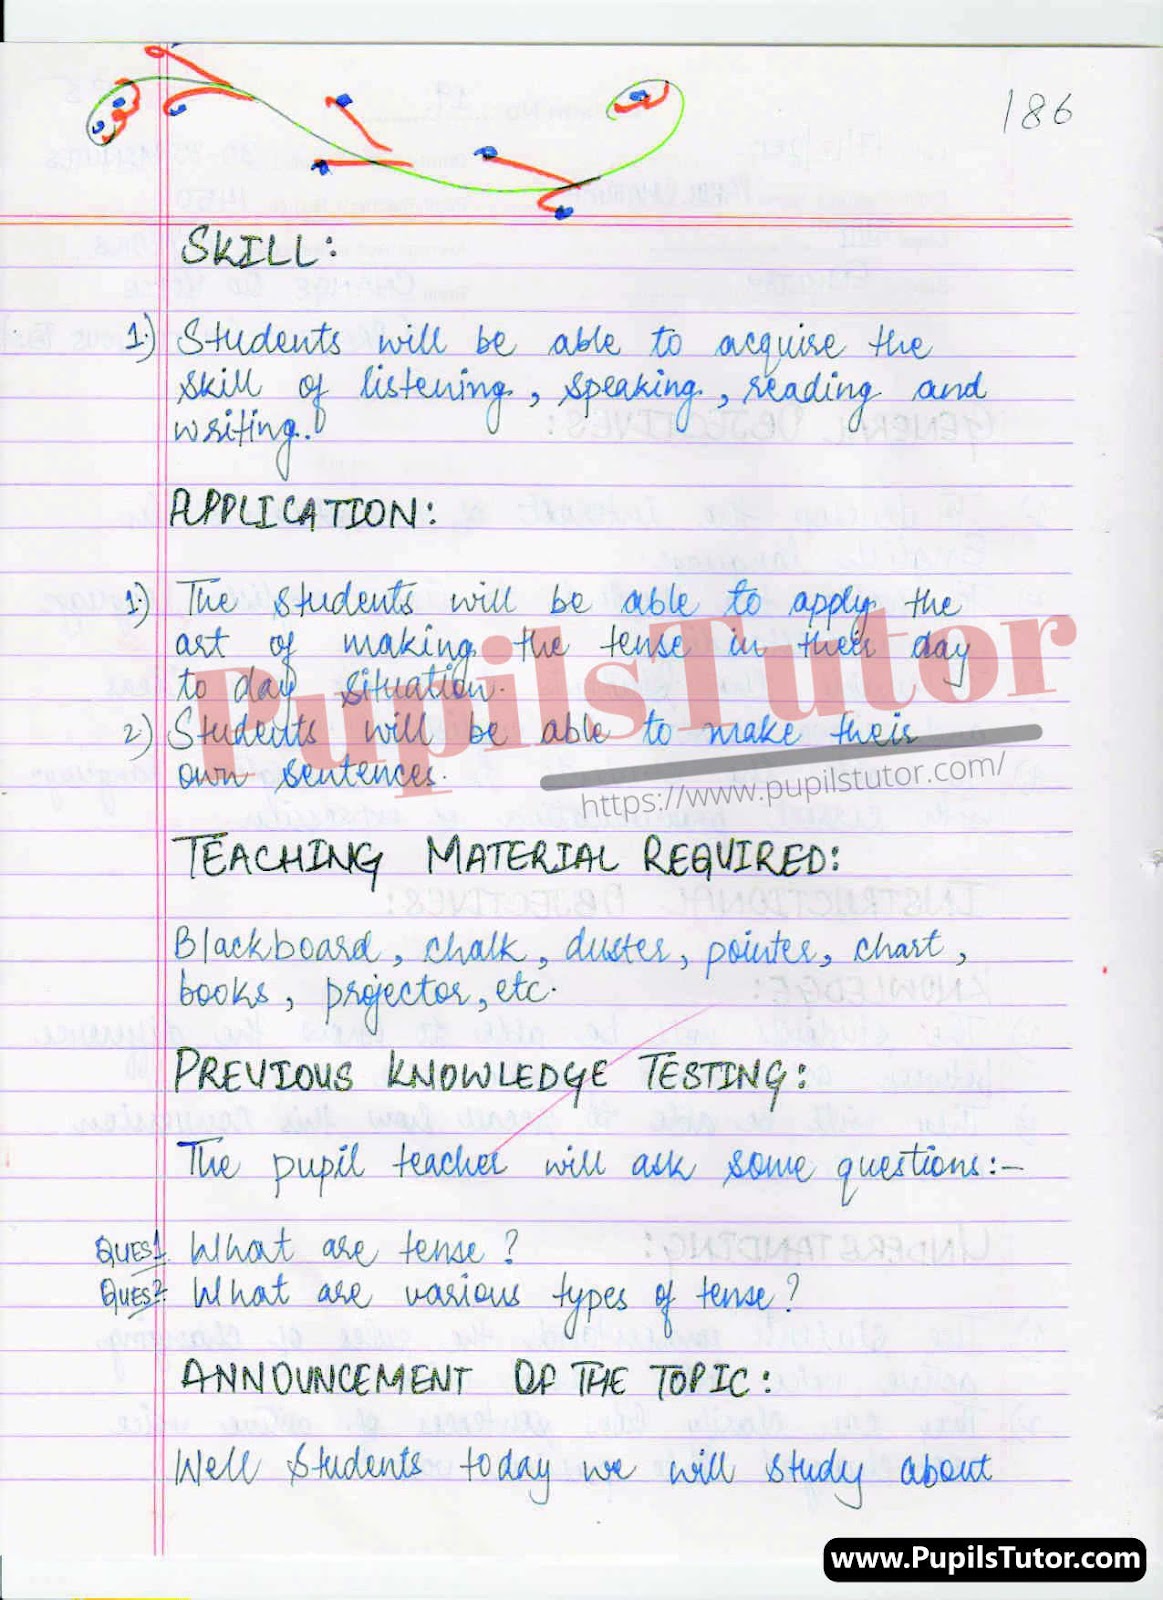 School Teaching Skill Active And Passive Voice Lesson Plan For B.Ed And Deled Free Download PDF And PPT (Power Point Presentation And Slides) – (Page And Image Number 2) – PupilsTutor